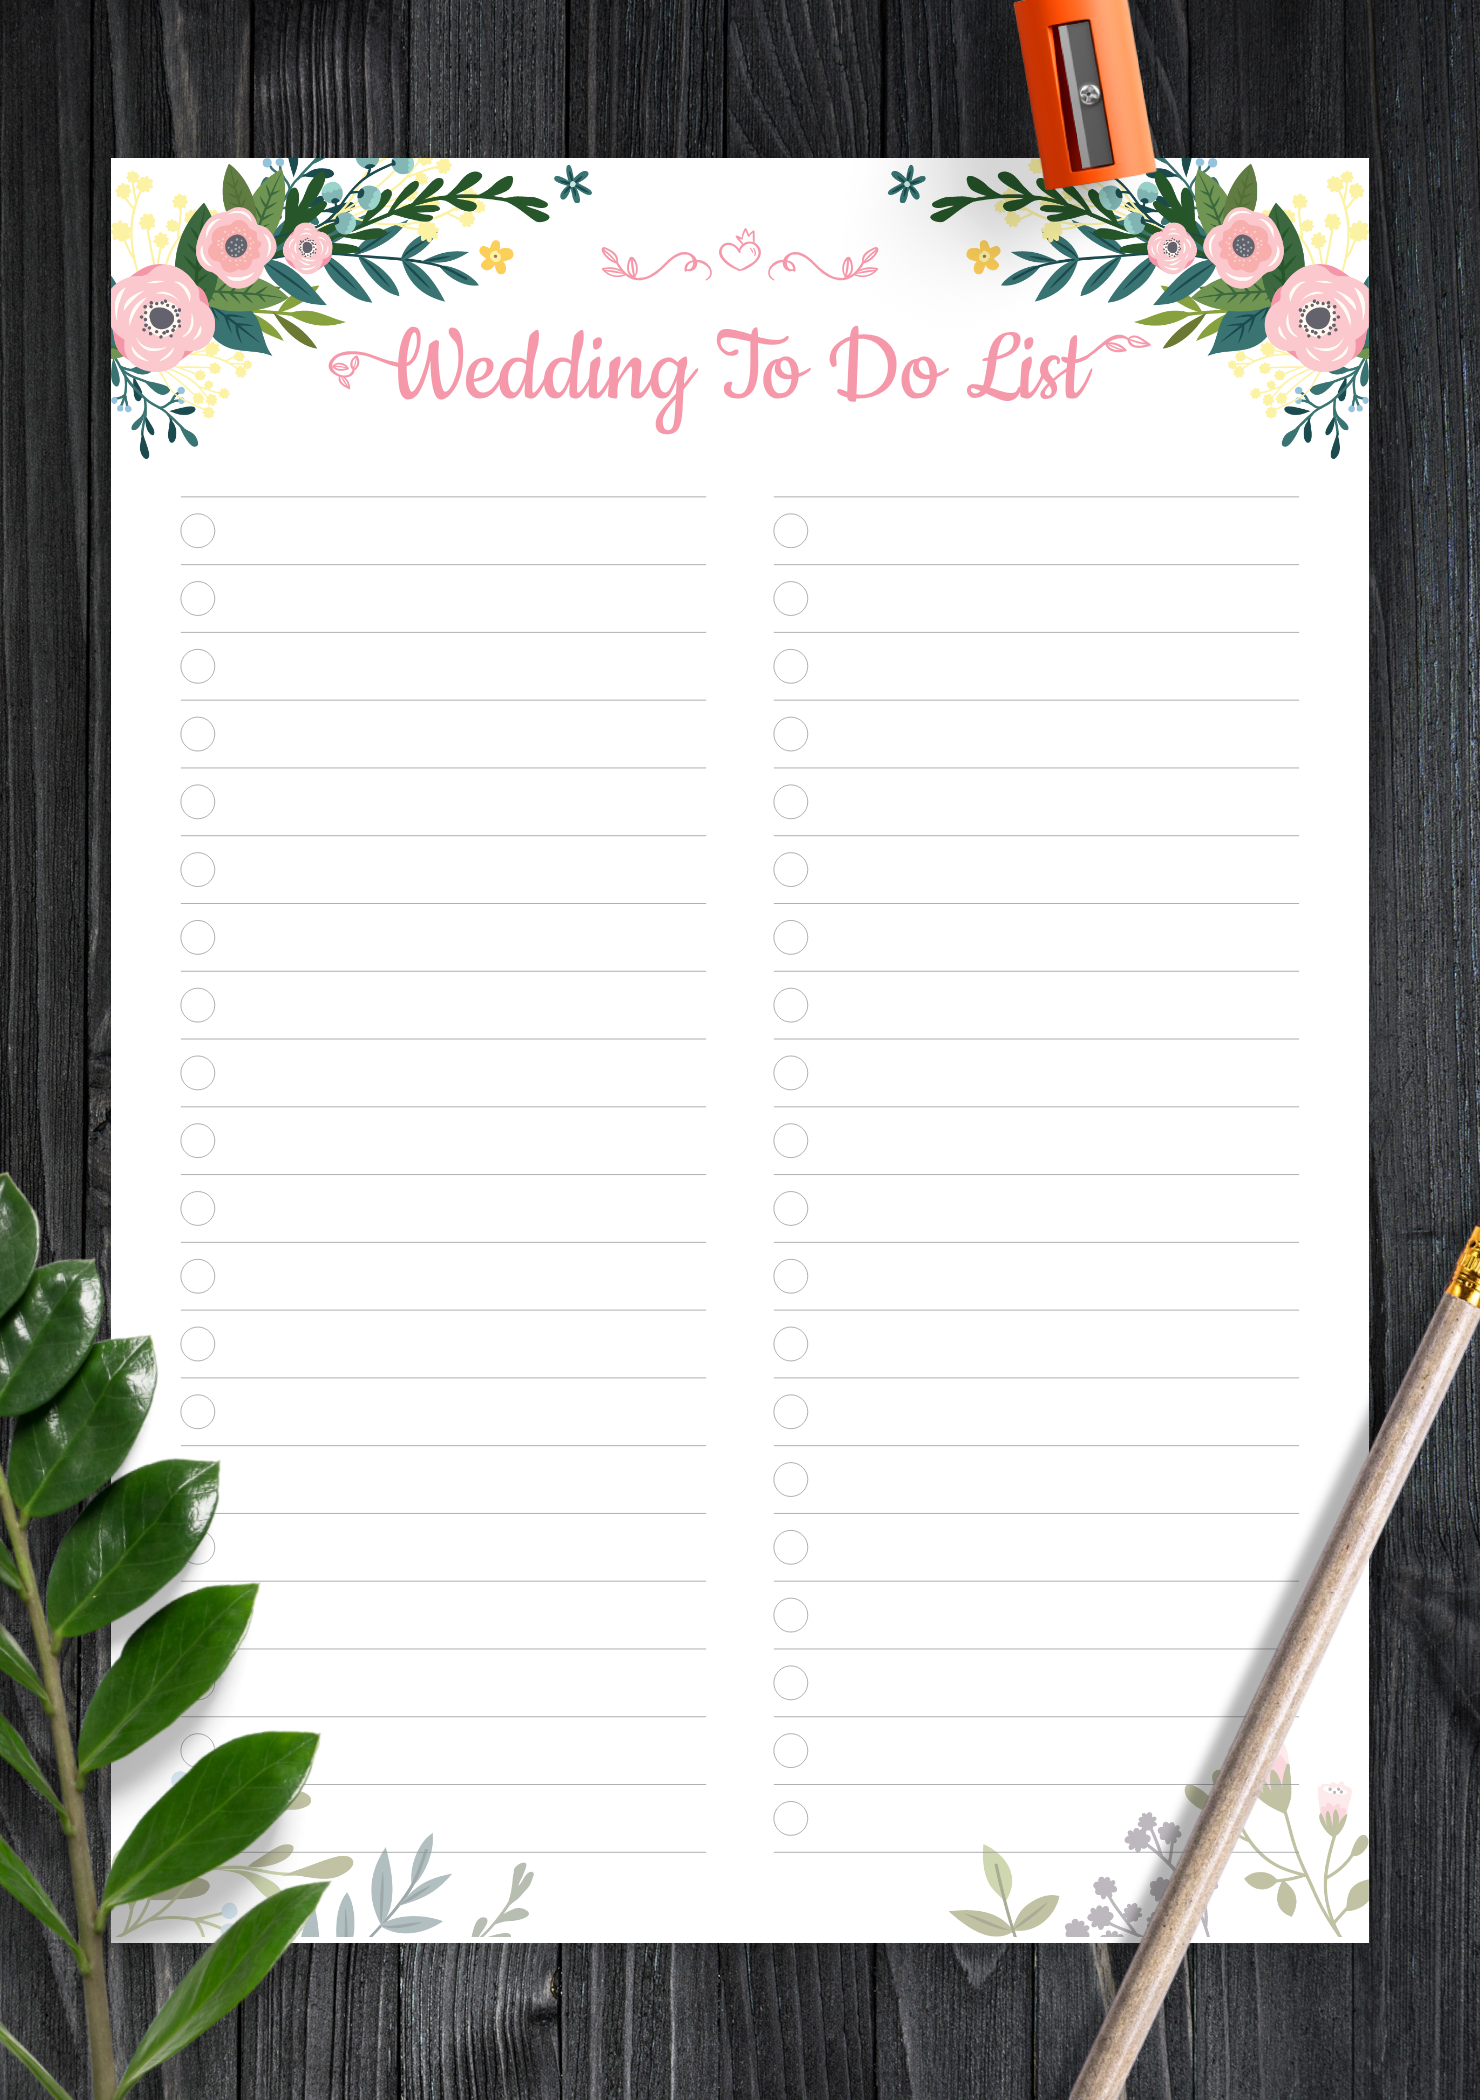 Download Printable Wedding To Do List PDF Throughout Wedding Photo Checklist Template Within Wedding Photo Checklist Template